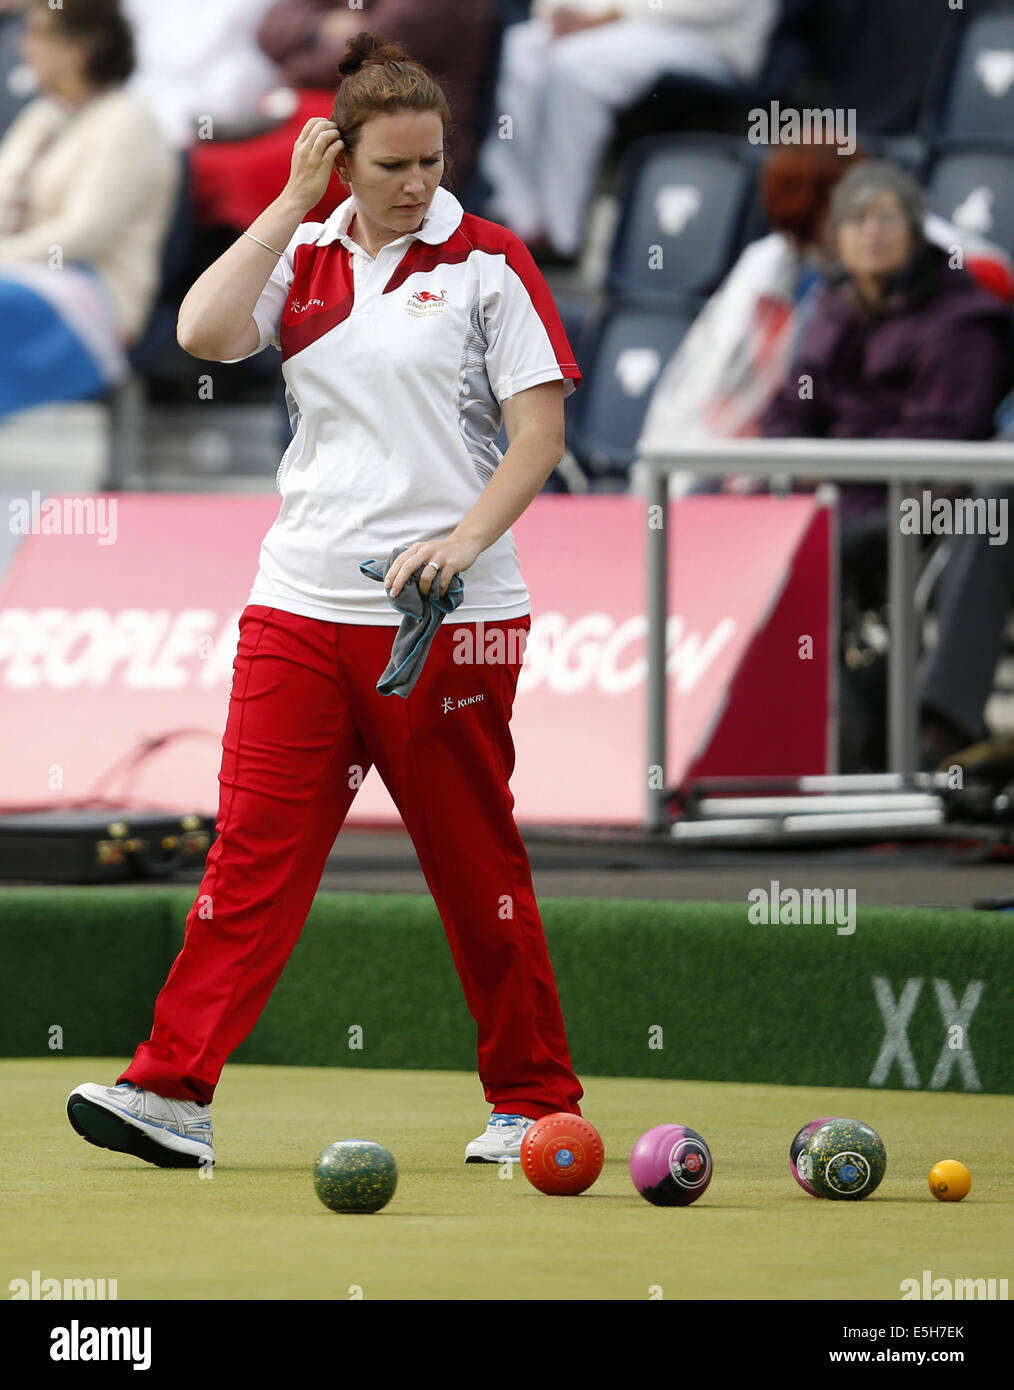 Glasgow, Scotland. 31st July, 2014. Sian Gordon of England ponders during the women's triples gold medal match of Lawn Bowls between England and Australia on day 8 of the Glasgow 2014 Commonwealth Games at Kelvingrove Lawn Bowls Centre in Glasgow, Scotland, on July 31, 2014. England claimed the title with 22-4. Credit:  Wang Lili/Xinhua/Alamy Live News Stock Photo